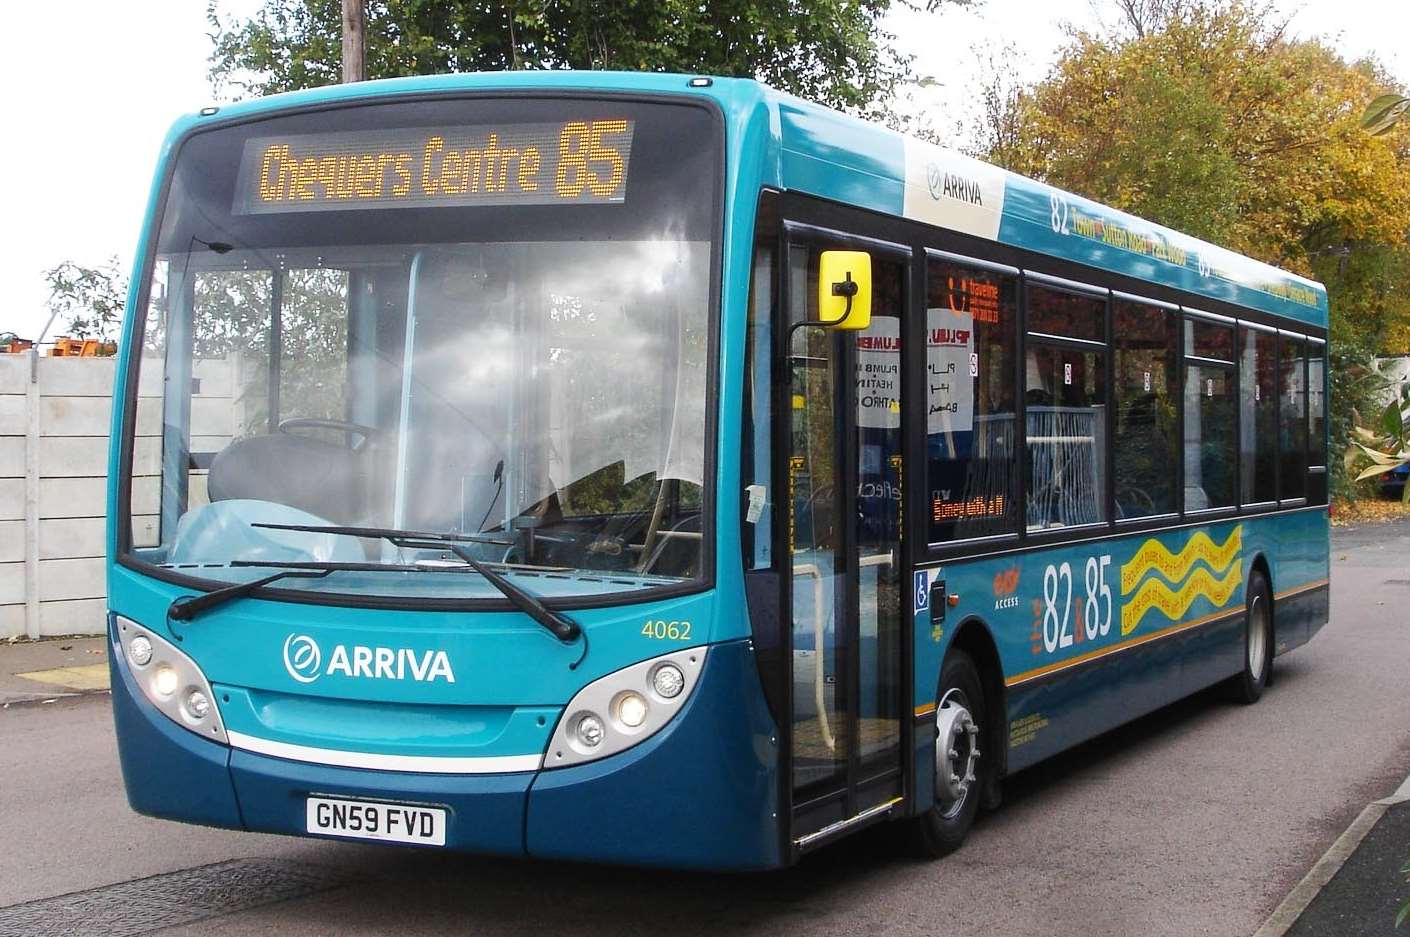 An Arriva bus. Library image.